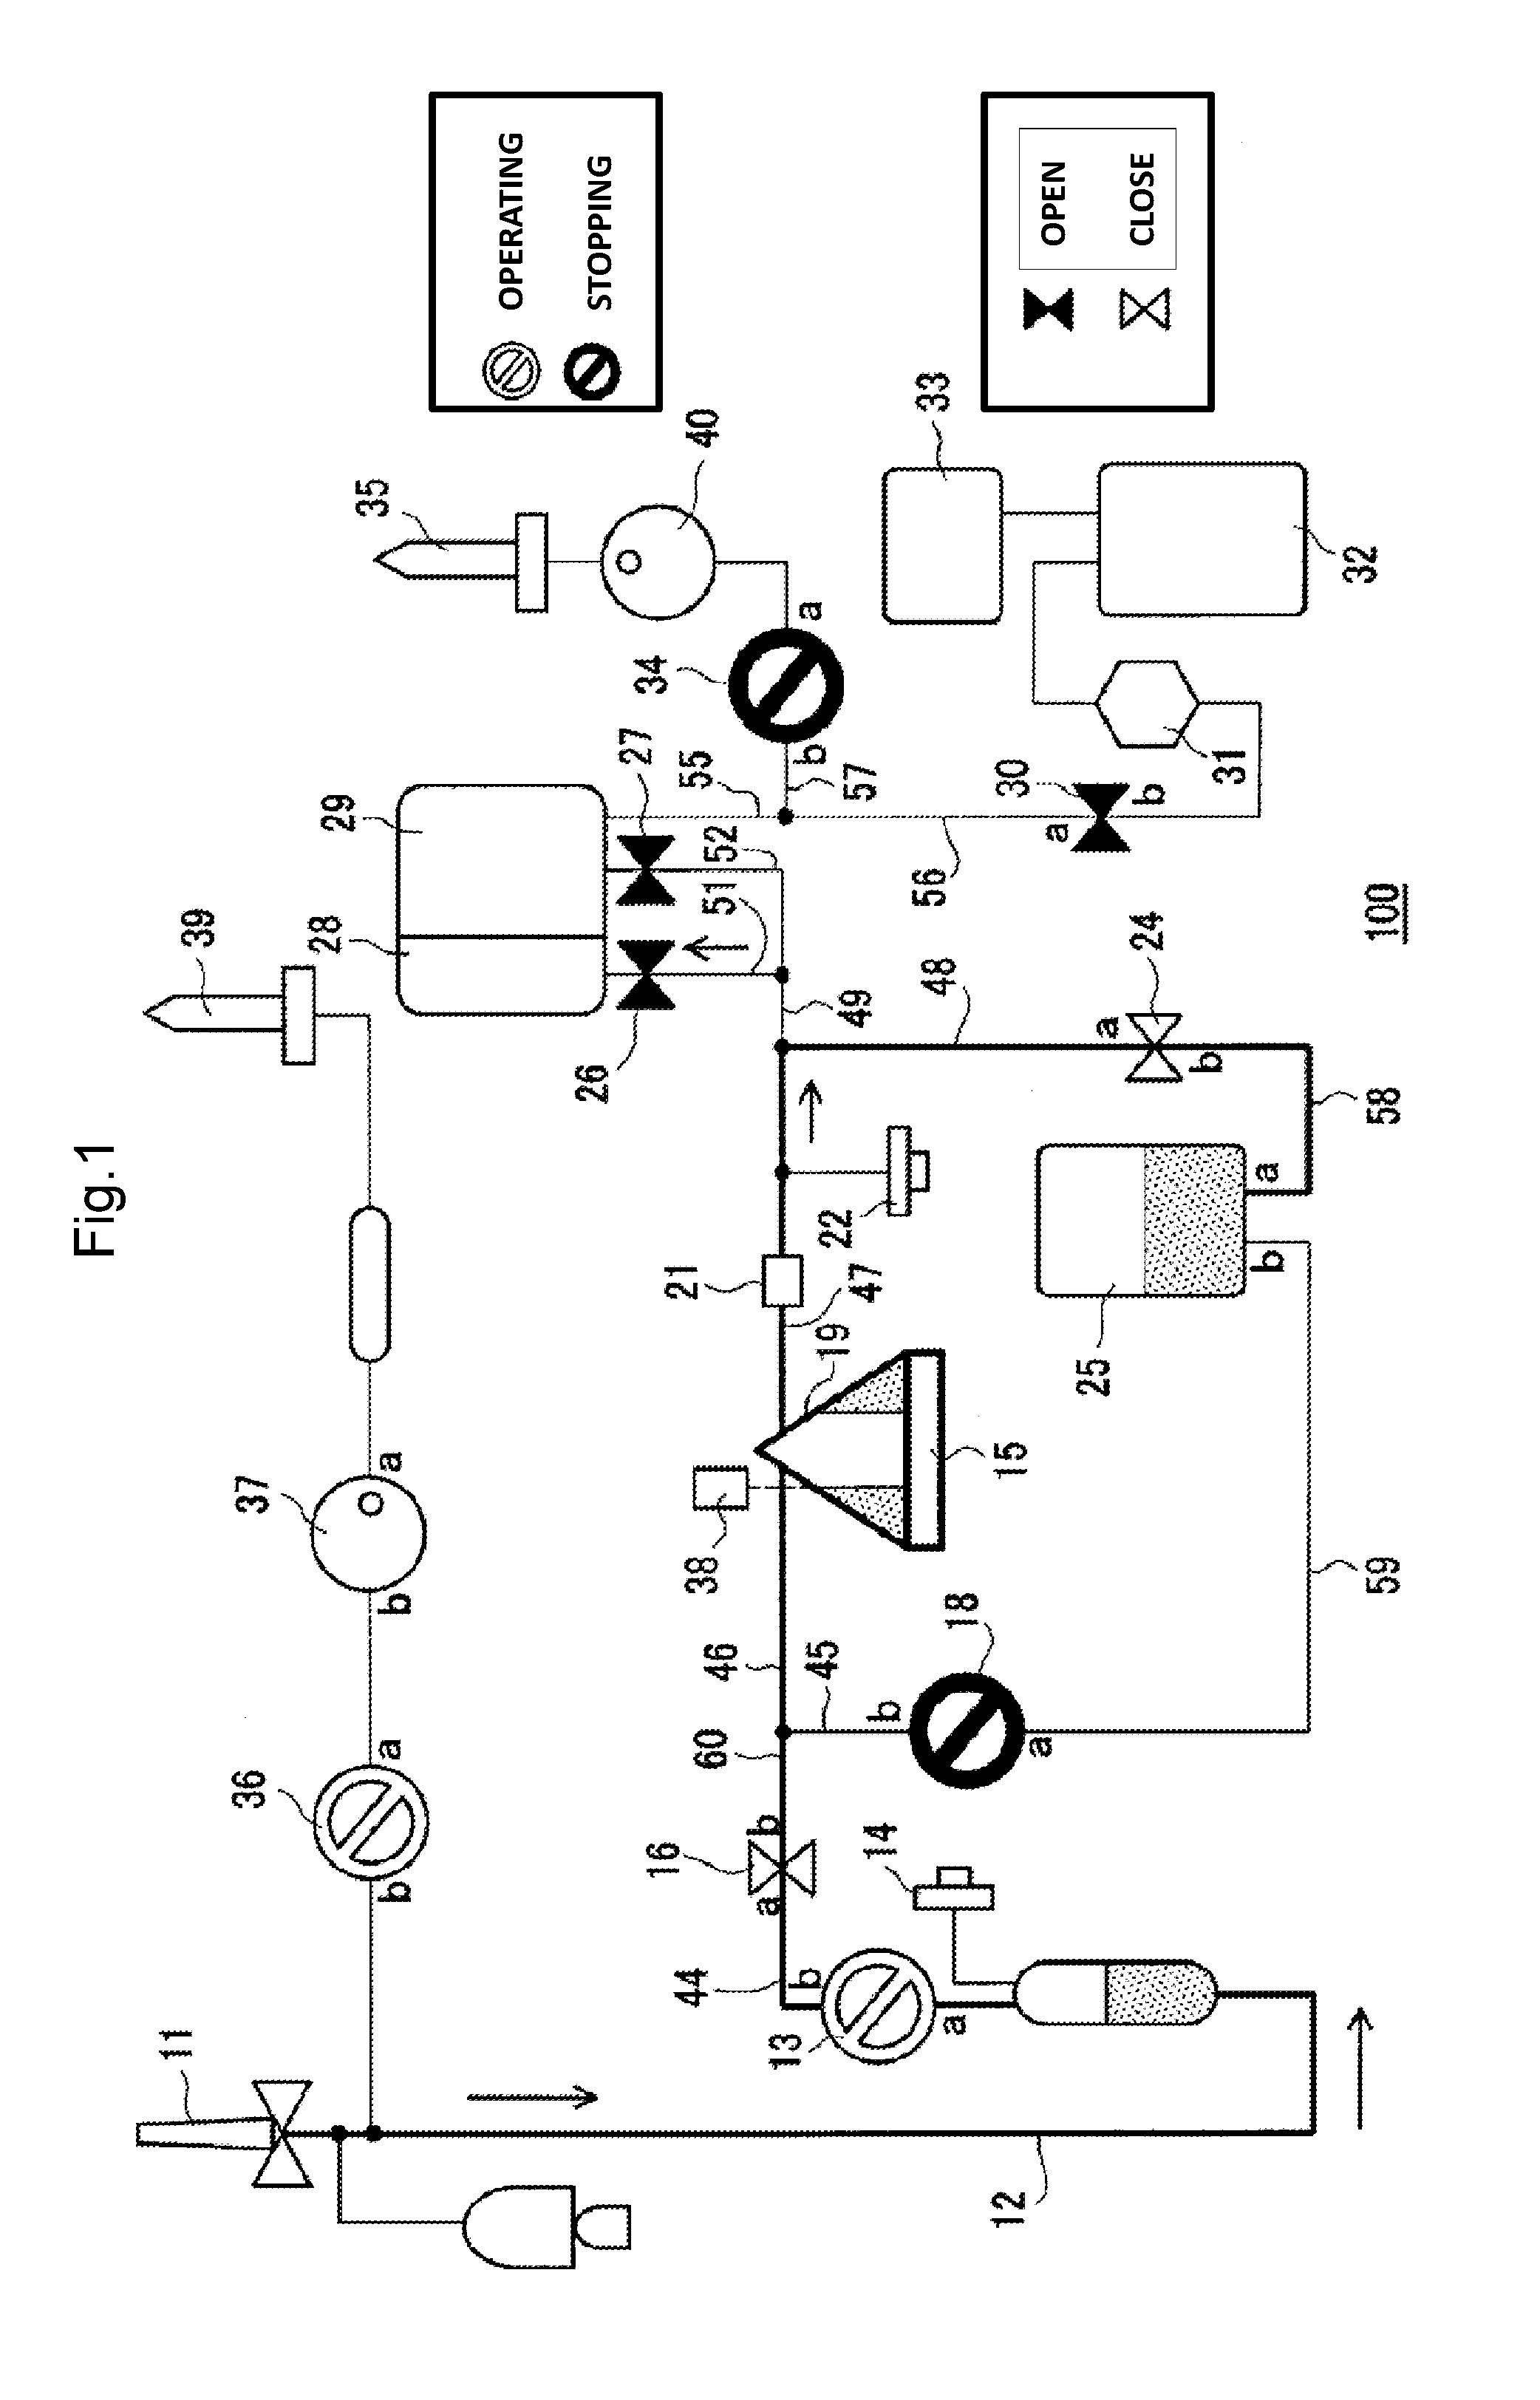 Blood Components Separation Device, and Centrifugal Separator